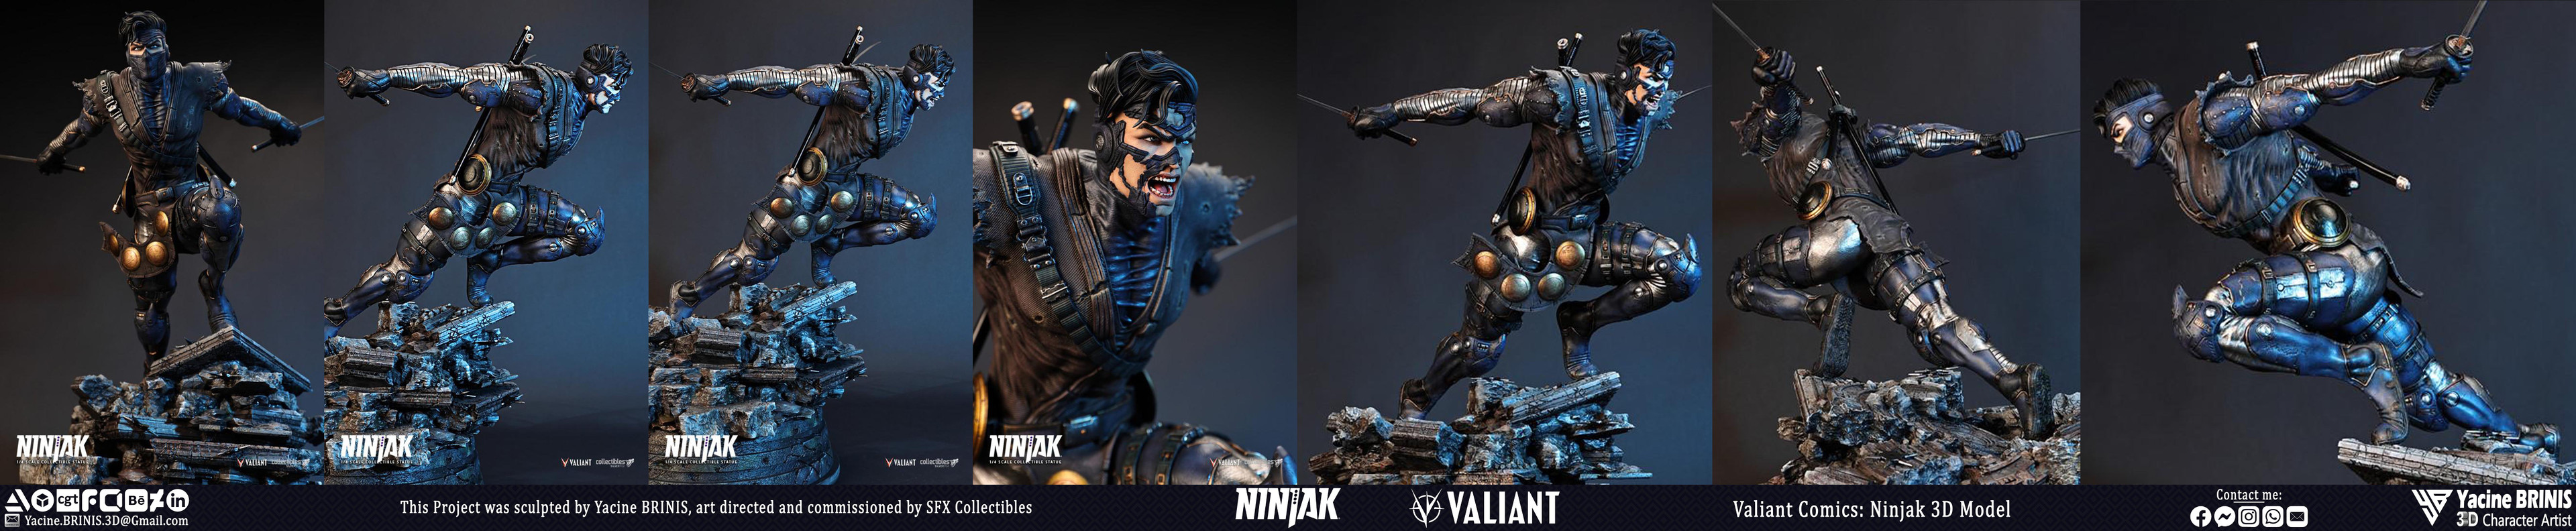 Ninjak Valiant Comics sculpted by Yacine BRINIS 034 Printed by SFX Collectibles